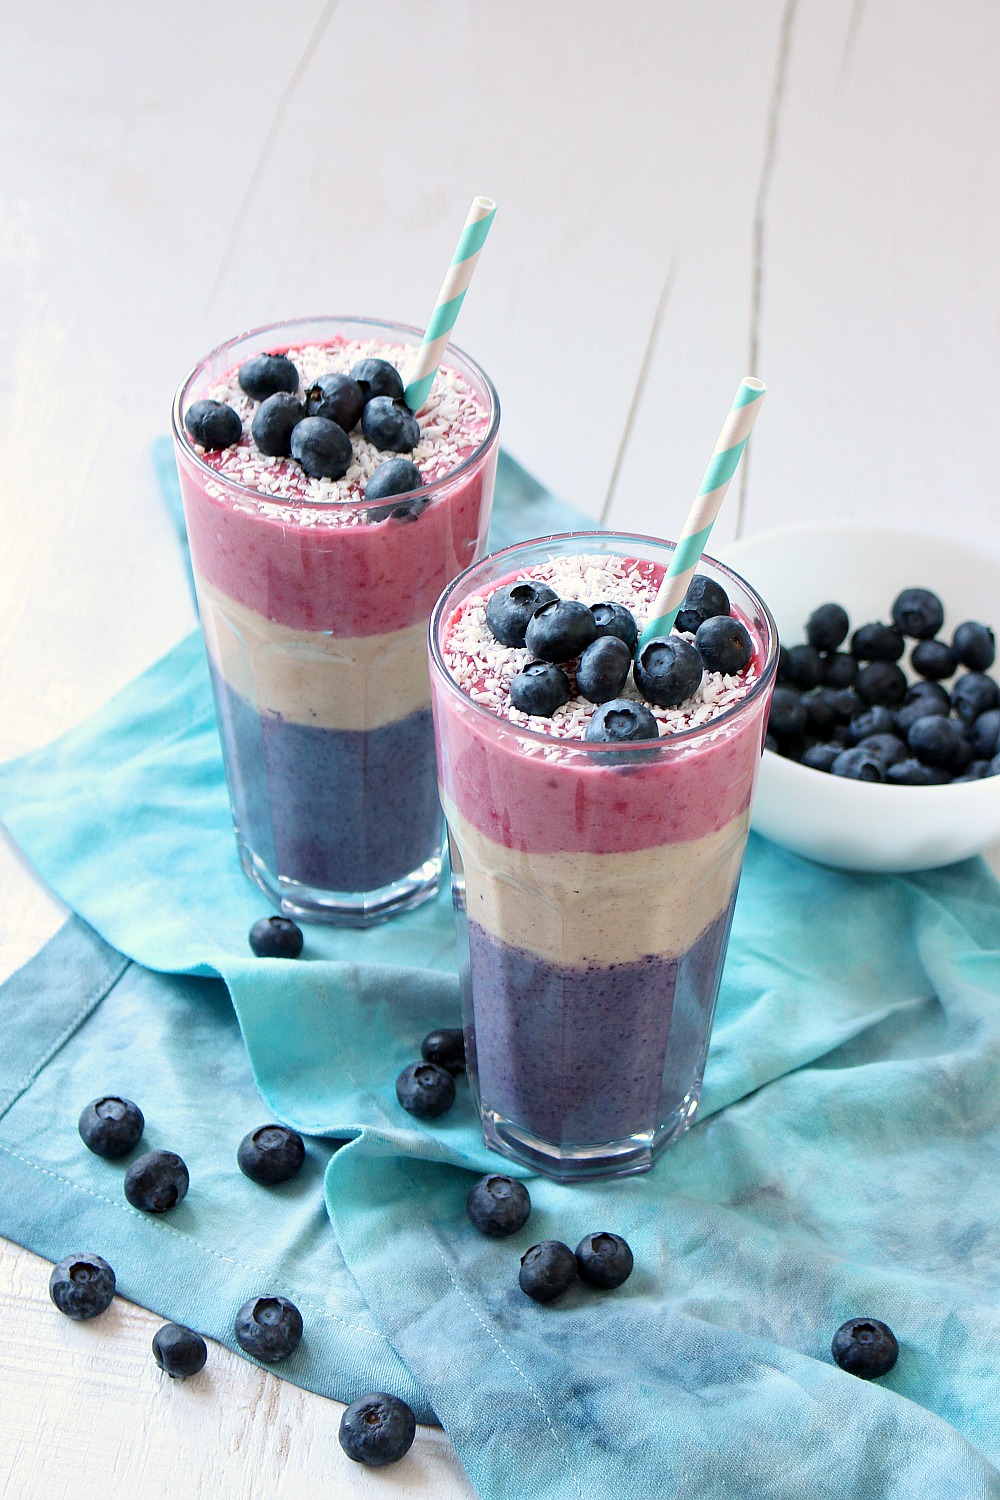 How to Make a Layered Smoothie